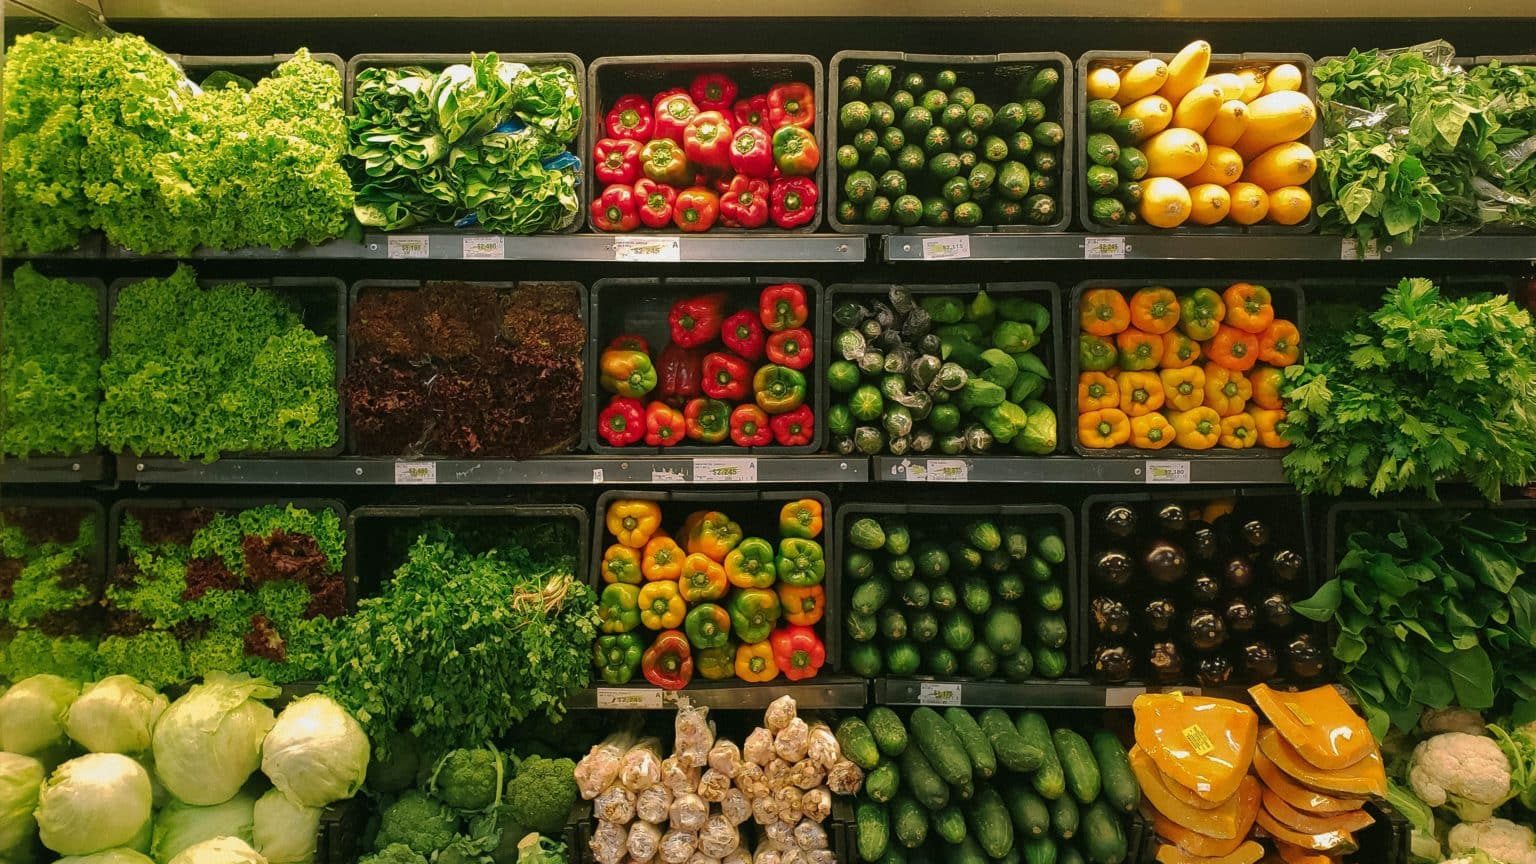 Grocery store produce section with rows and shelves of vegetables.